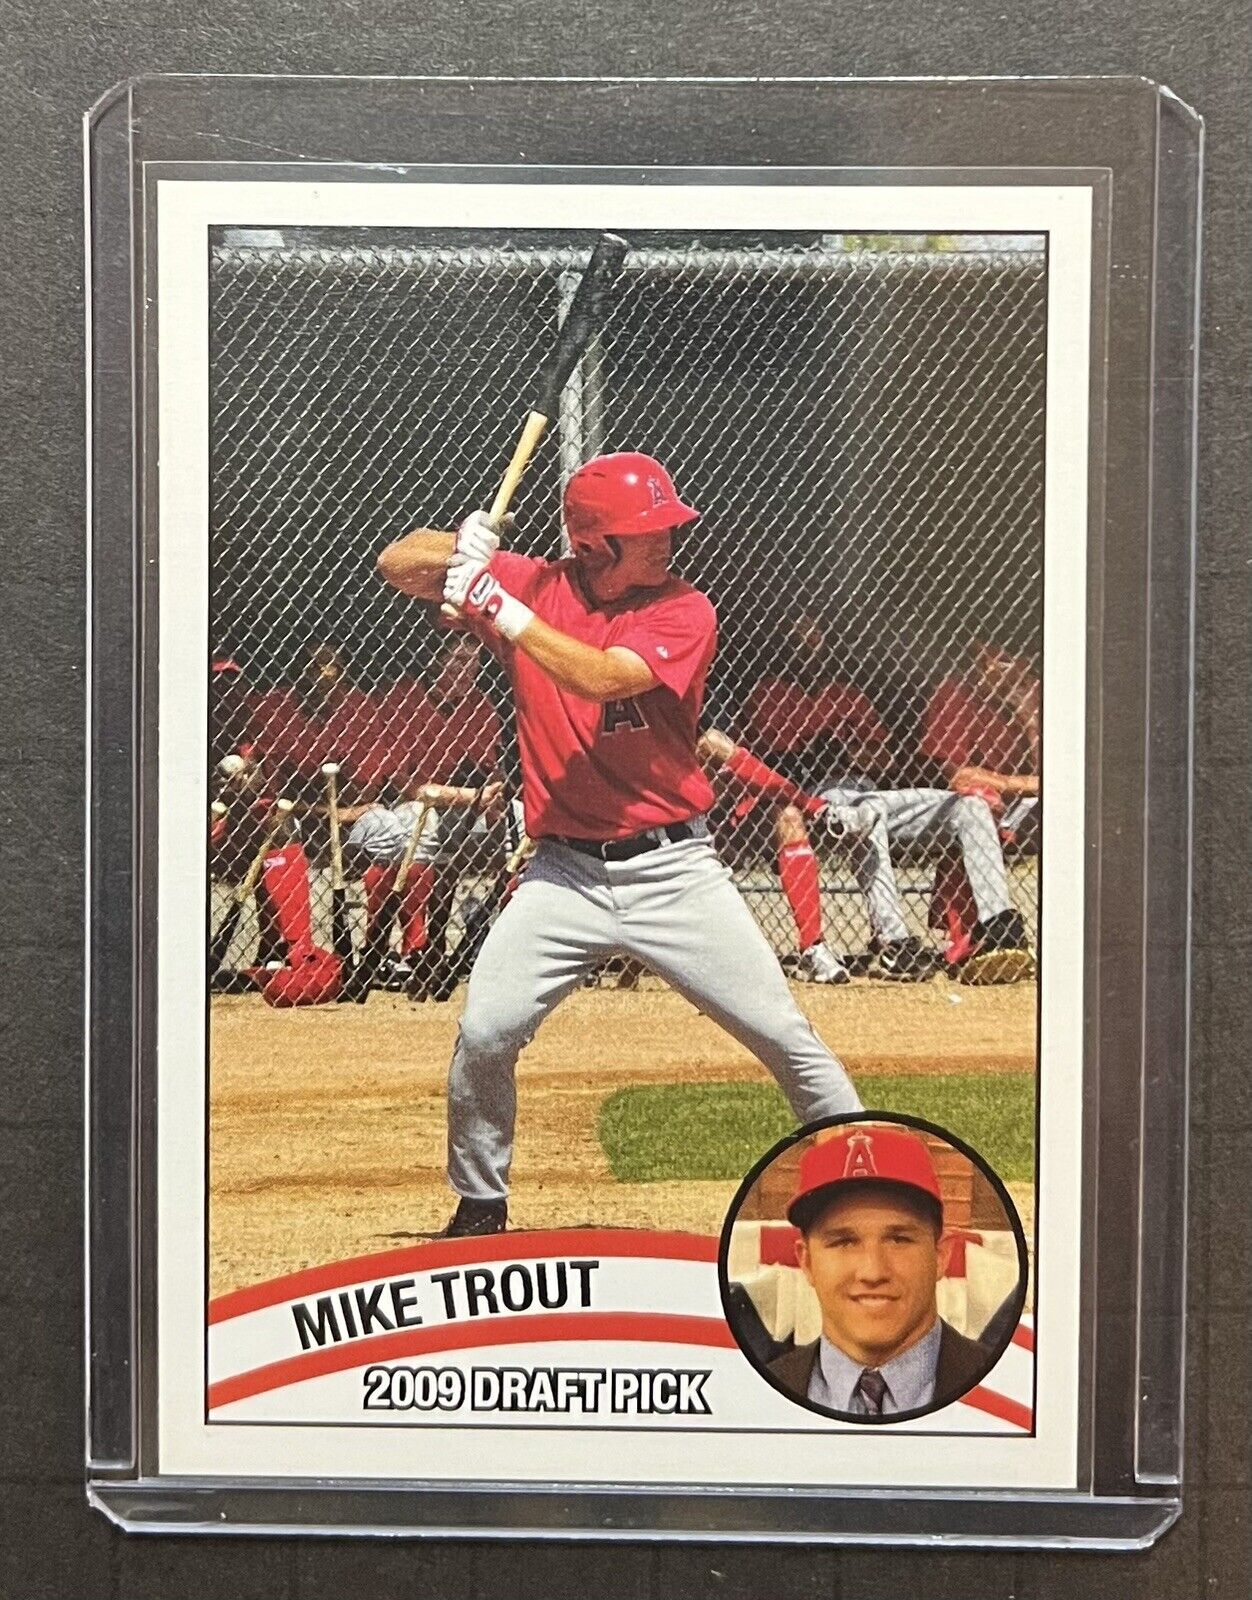 2009 Mike Trout Draft picks Rookie Card  Top Prospect Los Angeles Angels